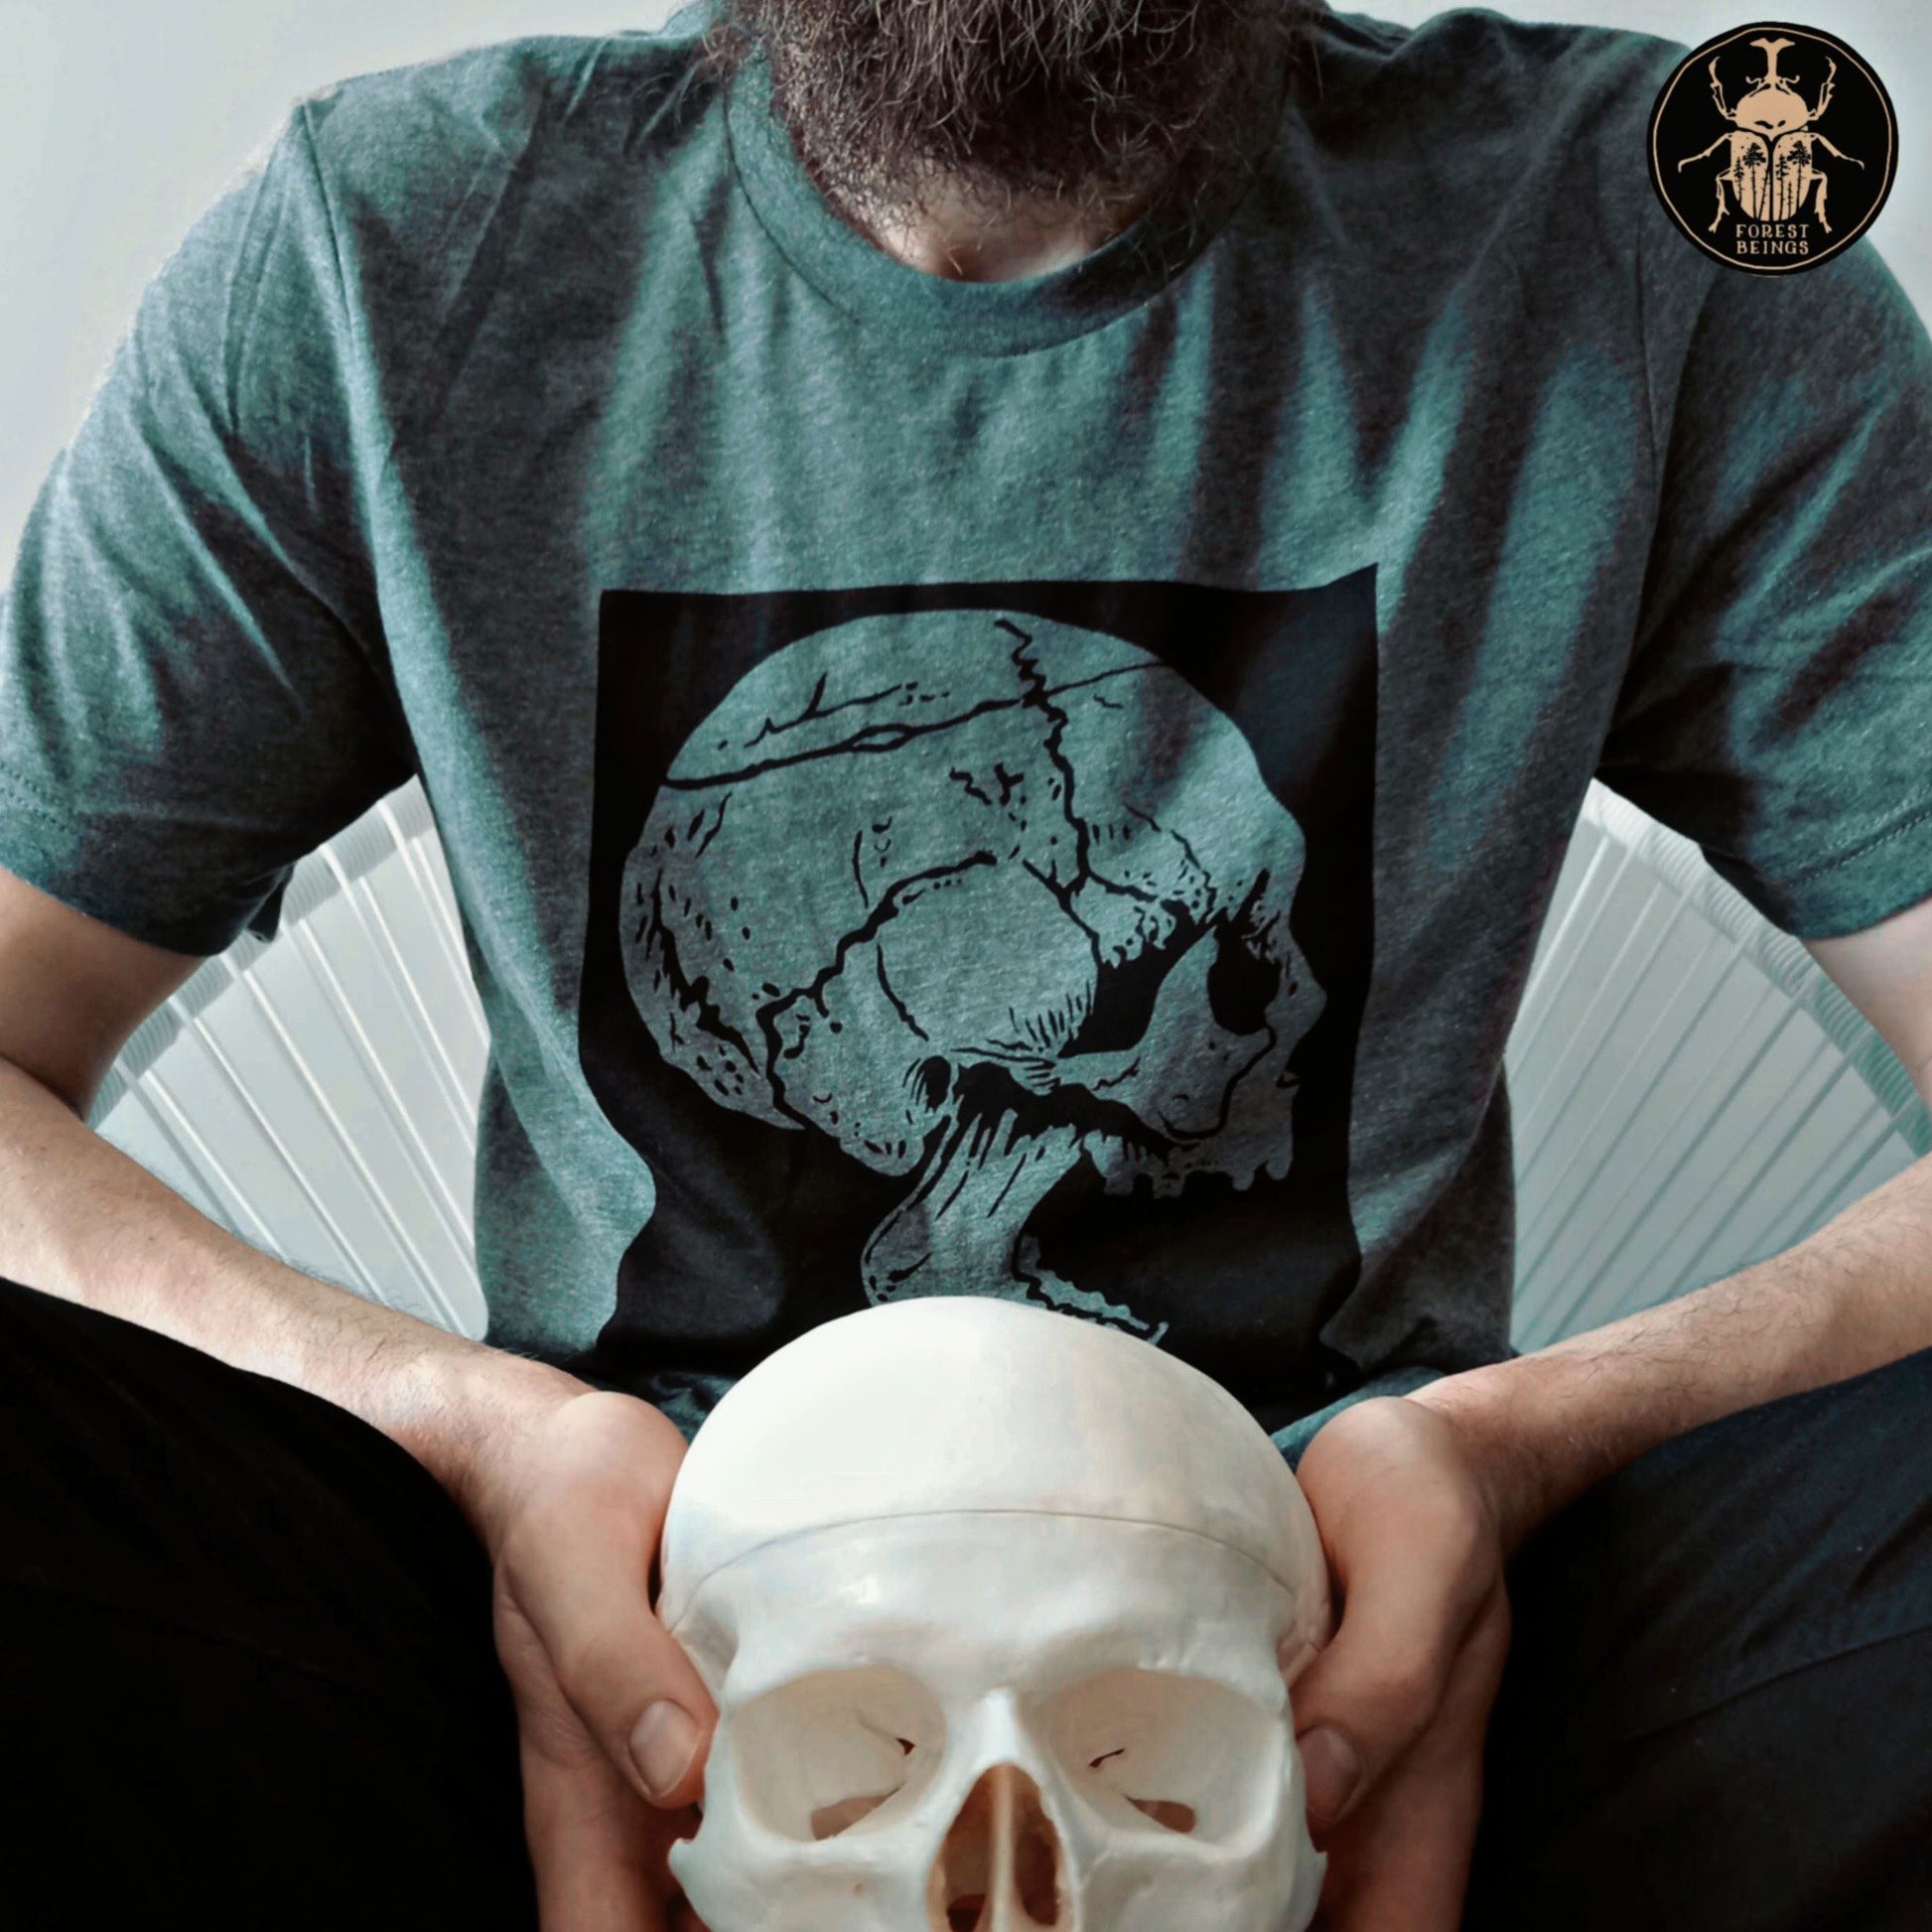 A gothic guy with a beard, holding a skull and wearing a t-shirt with a skull print on it.